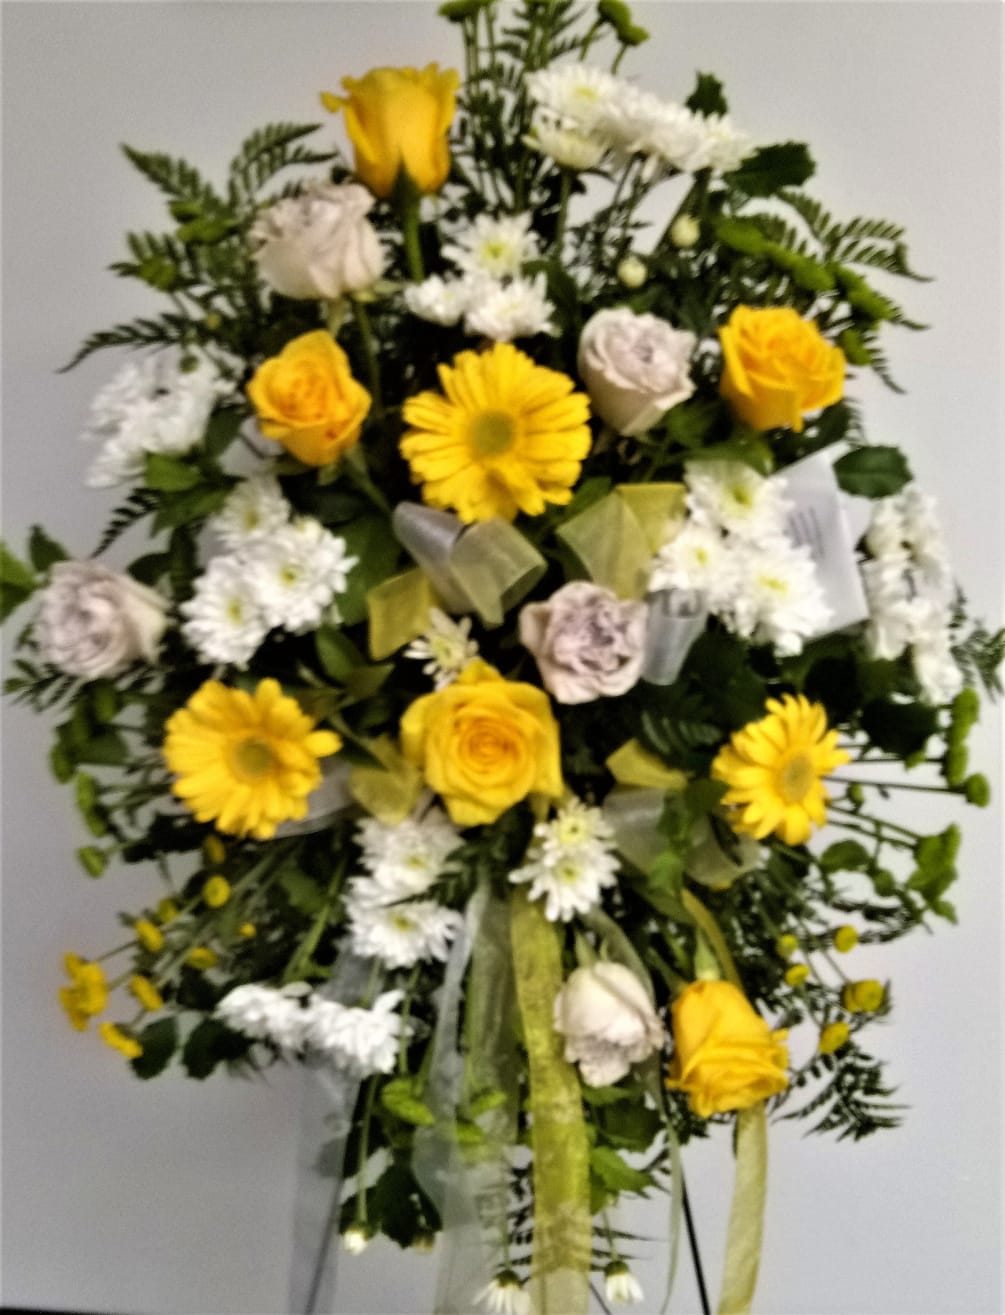 Funeral or memorial service standing easel fresh floral spray.